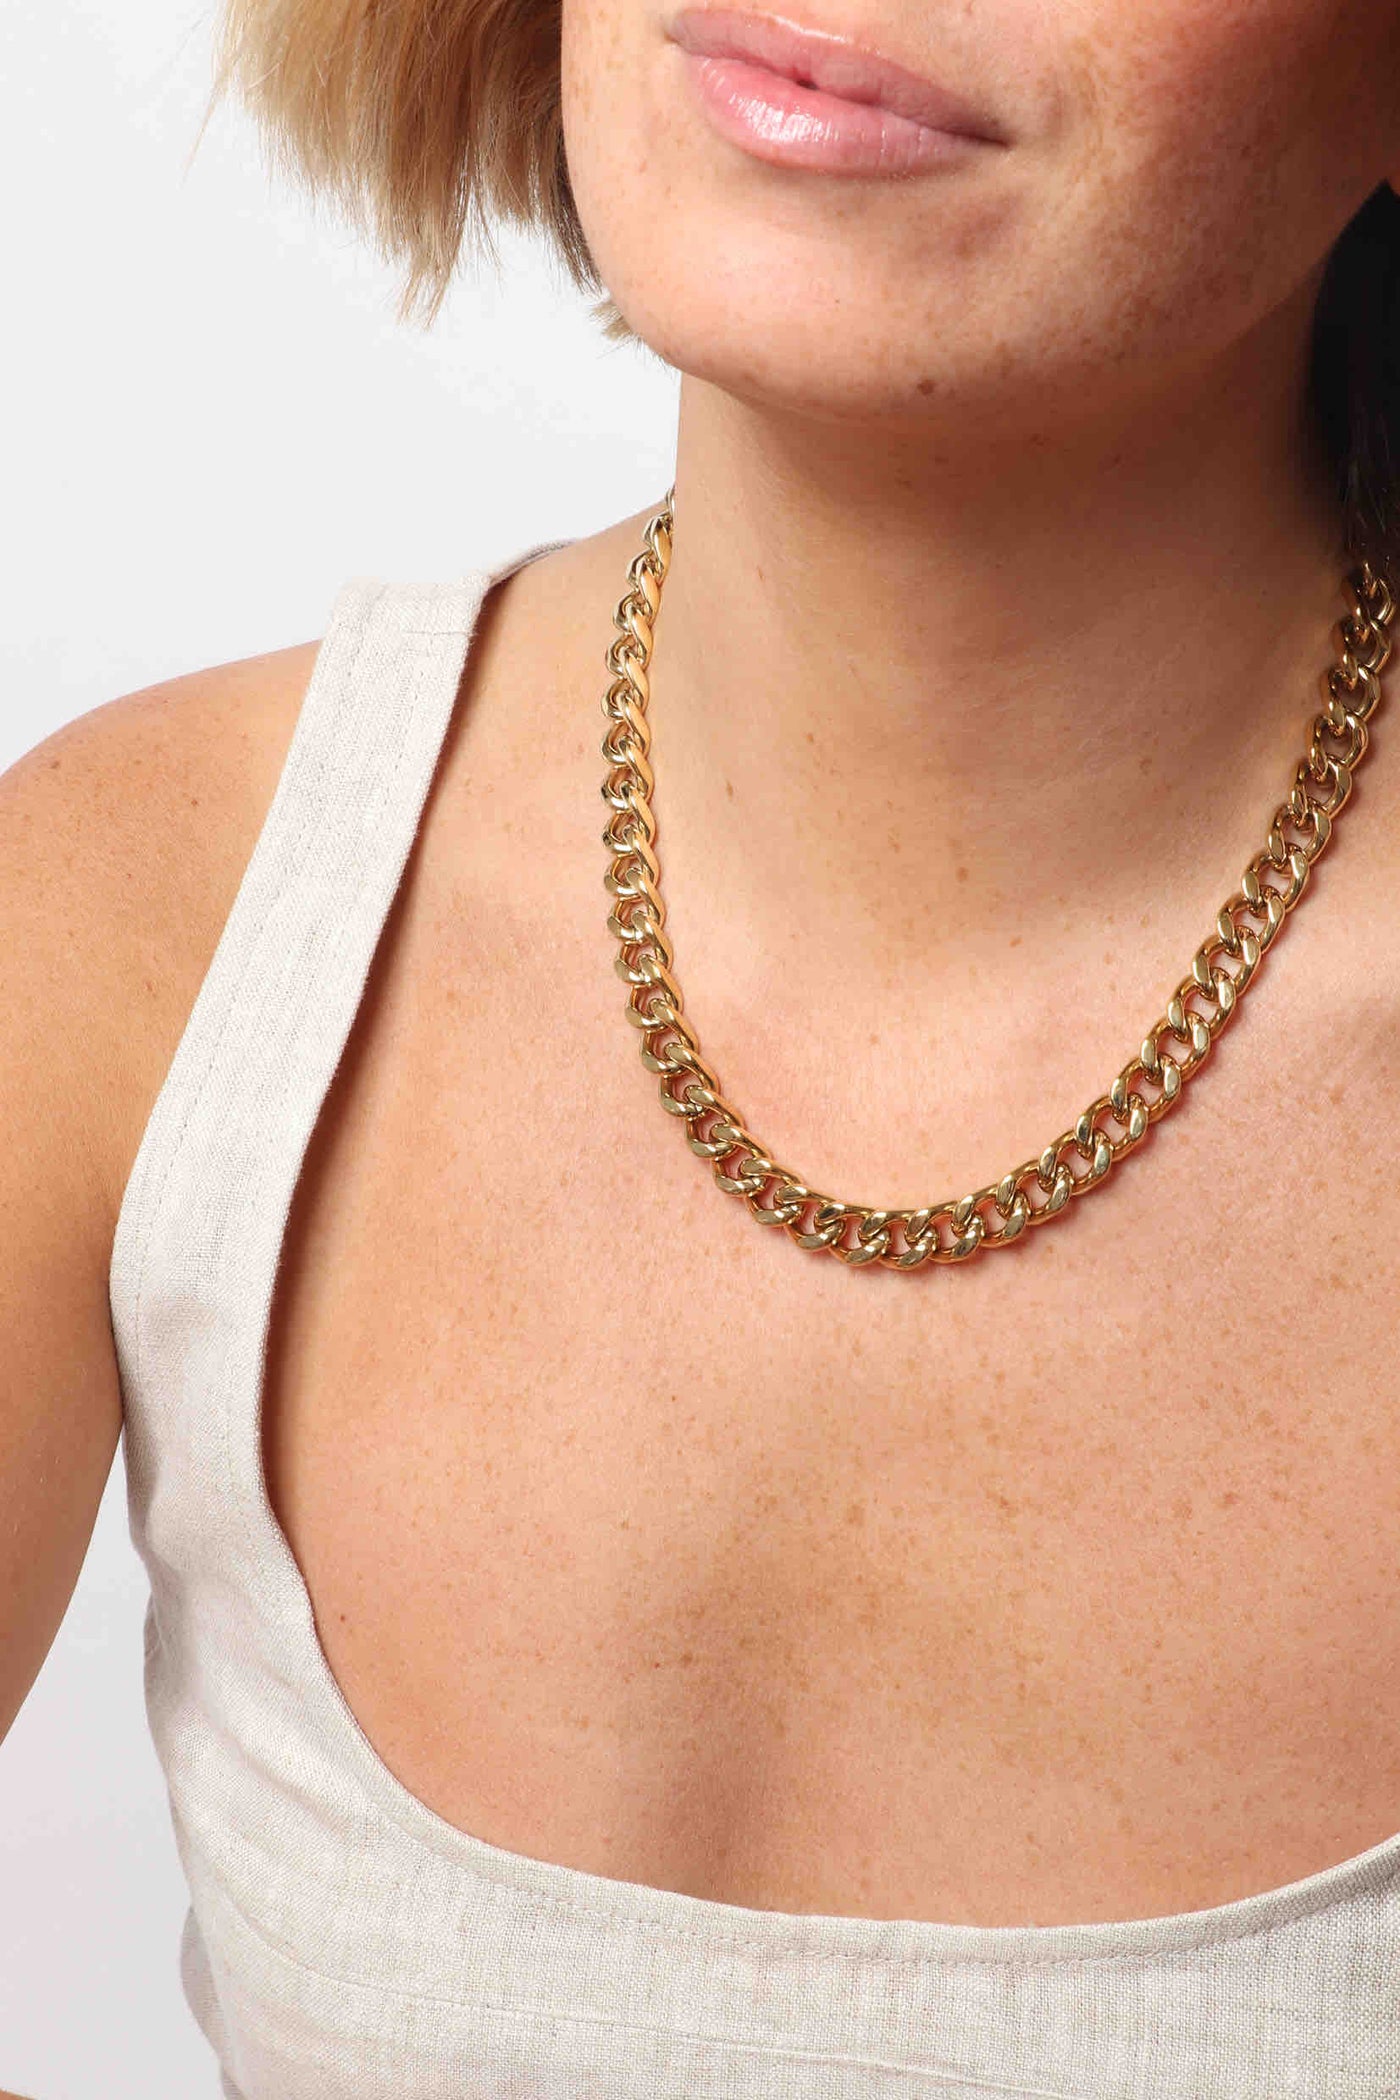 Marrin Costello wearing Marrin Costello Jewelry Queens Chain chunky statement cuban link chain necklace with lobster clasp closure. Waterproof, sustainable, hypoallergenic. 14k gold plated stainless steel.